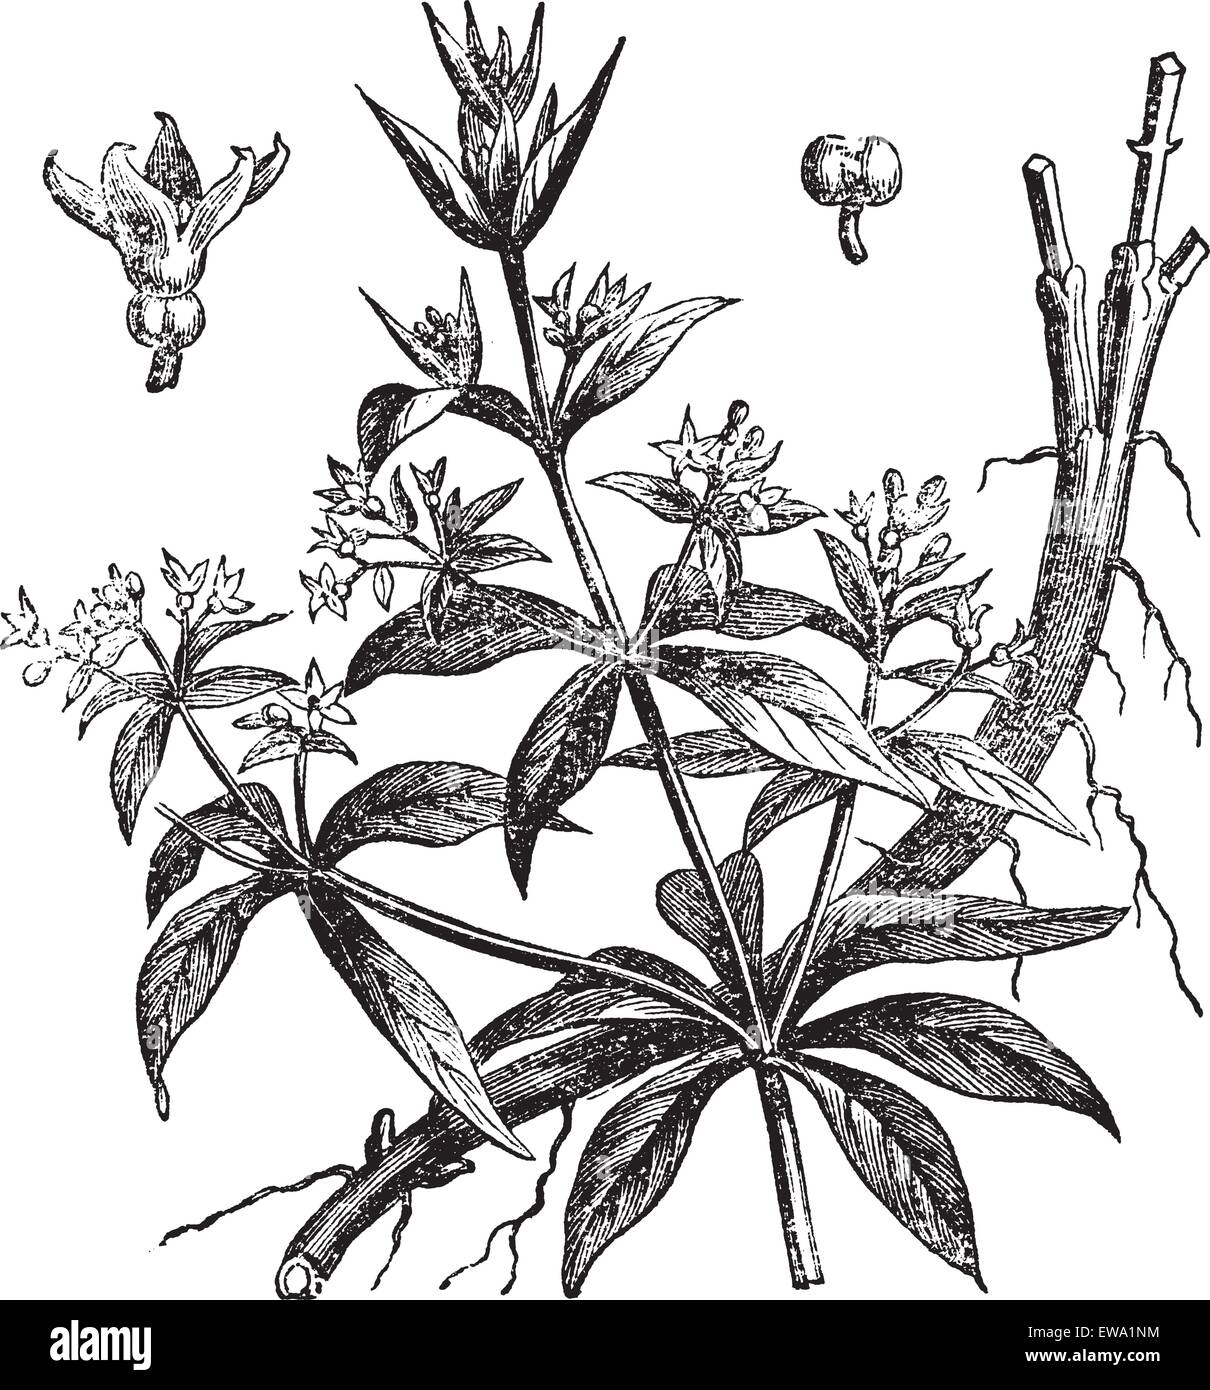 Rubia tinctorum or Common madder or Dyer's madder, vintage engraving. Old engraved illustration of Rubia tinctorum, isolated on a white background. Stock Vector